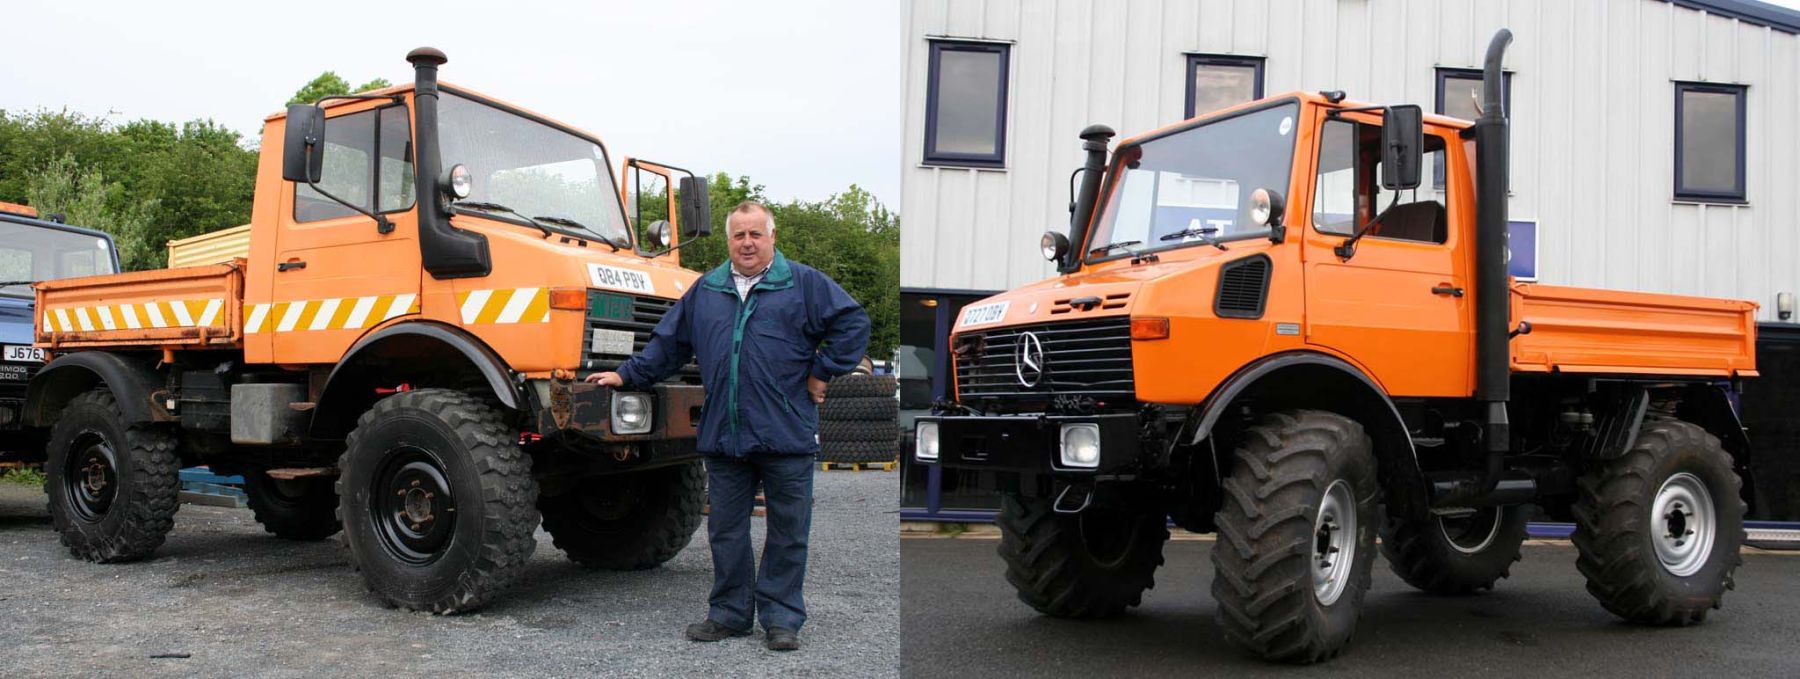 Two Unimog U1200s Sold to Family Contracting Compa